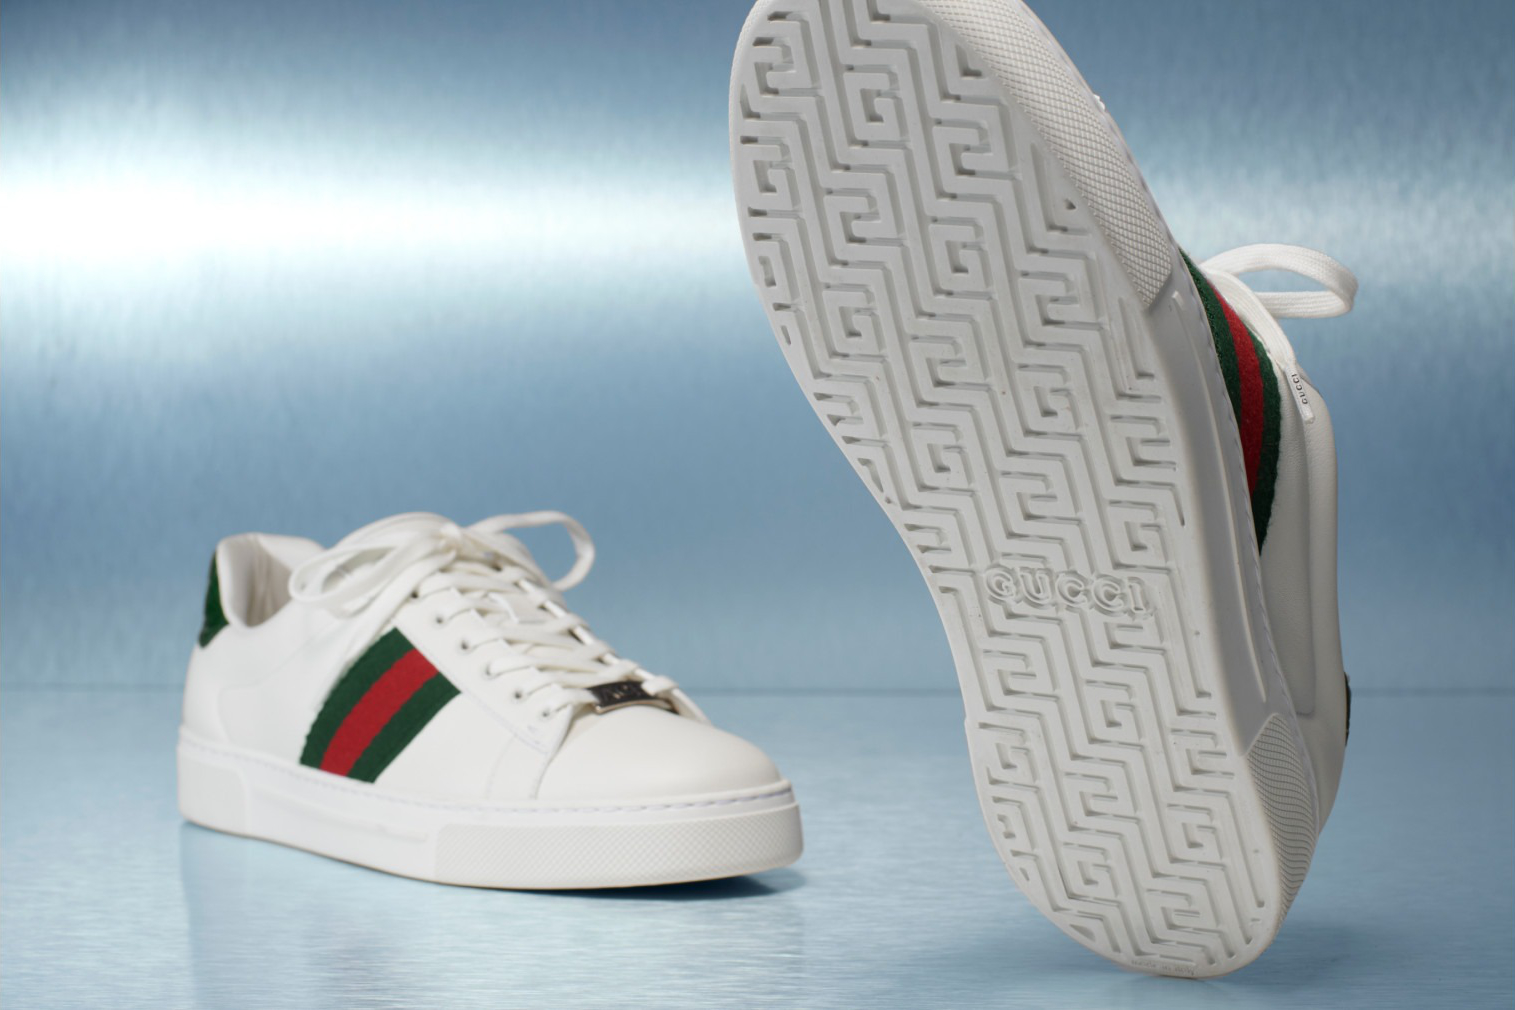 Gucci shoes and sneakers prices in South Africa in 2023: Where to shop 